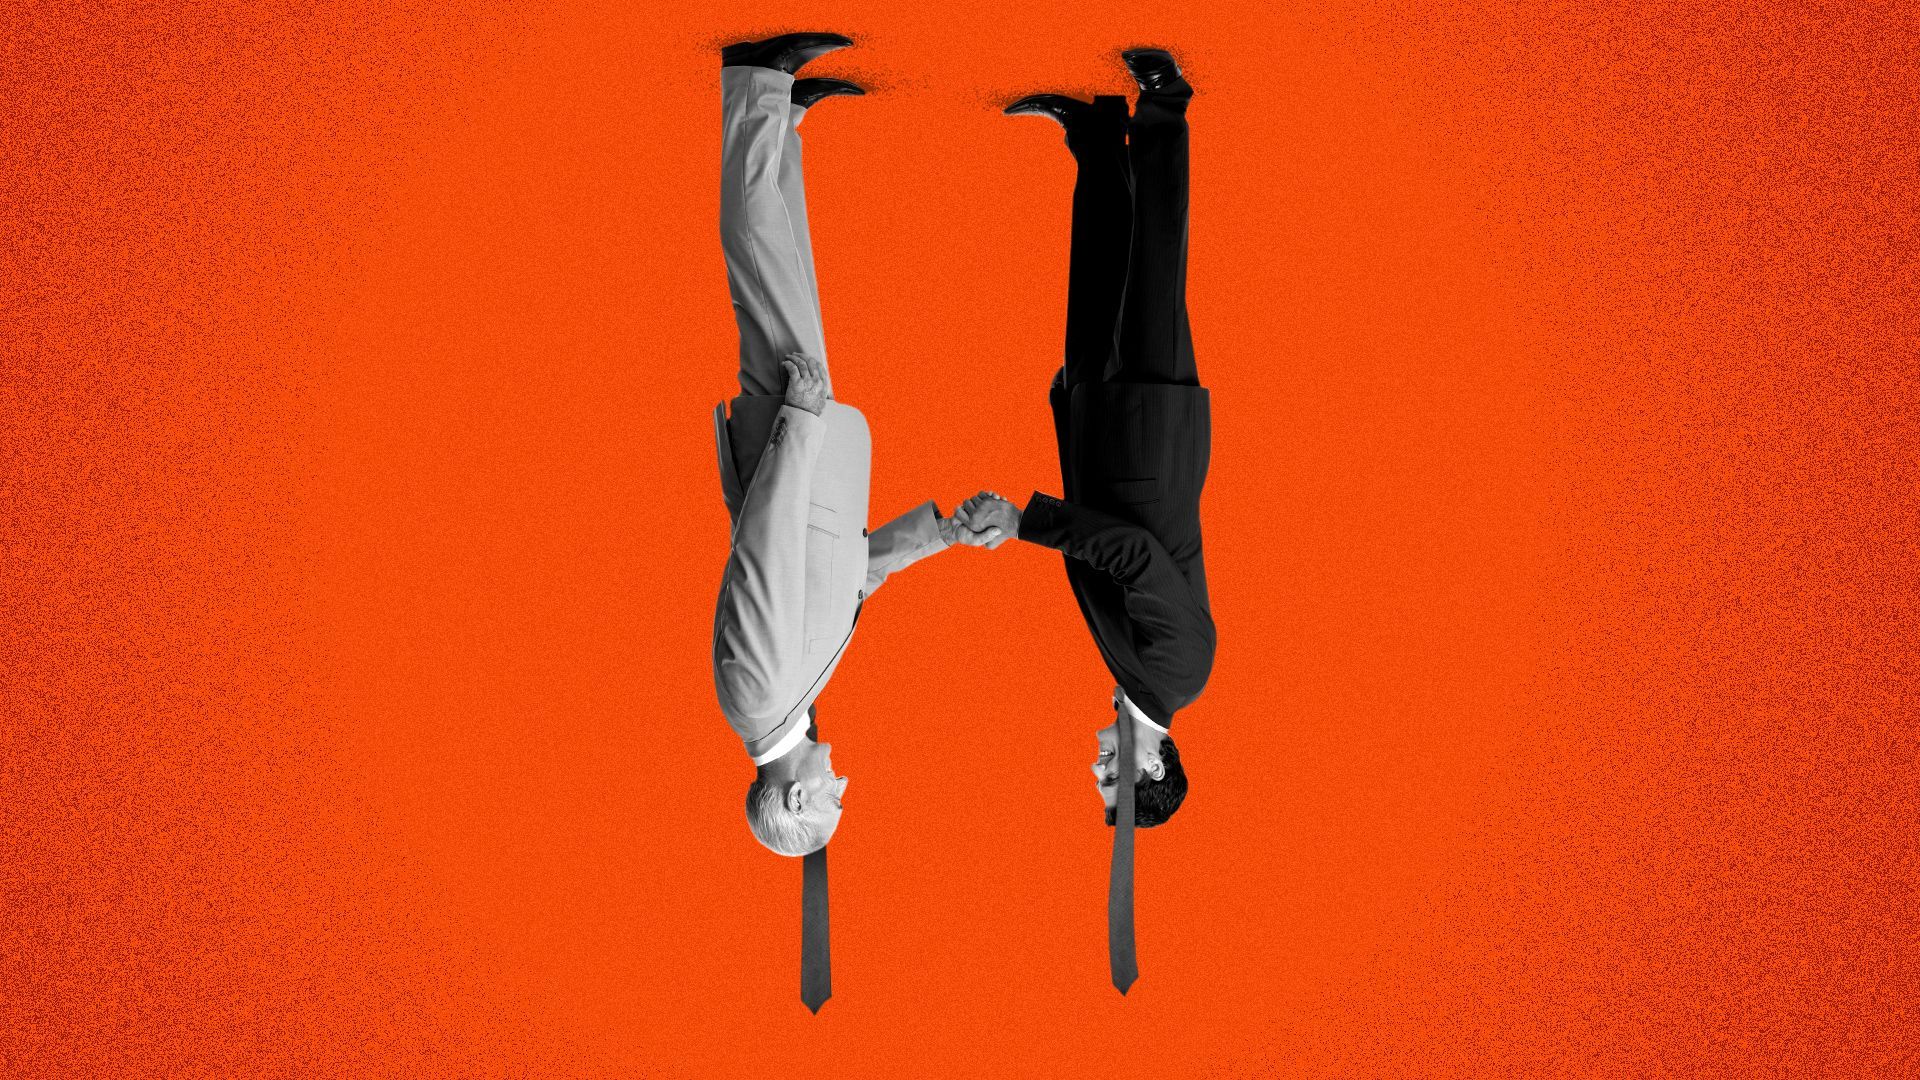 Illustration of two people shaking hands upside down. Their ties are hanging from gravity. 